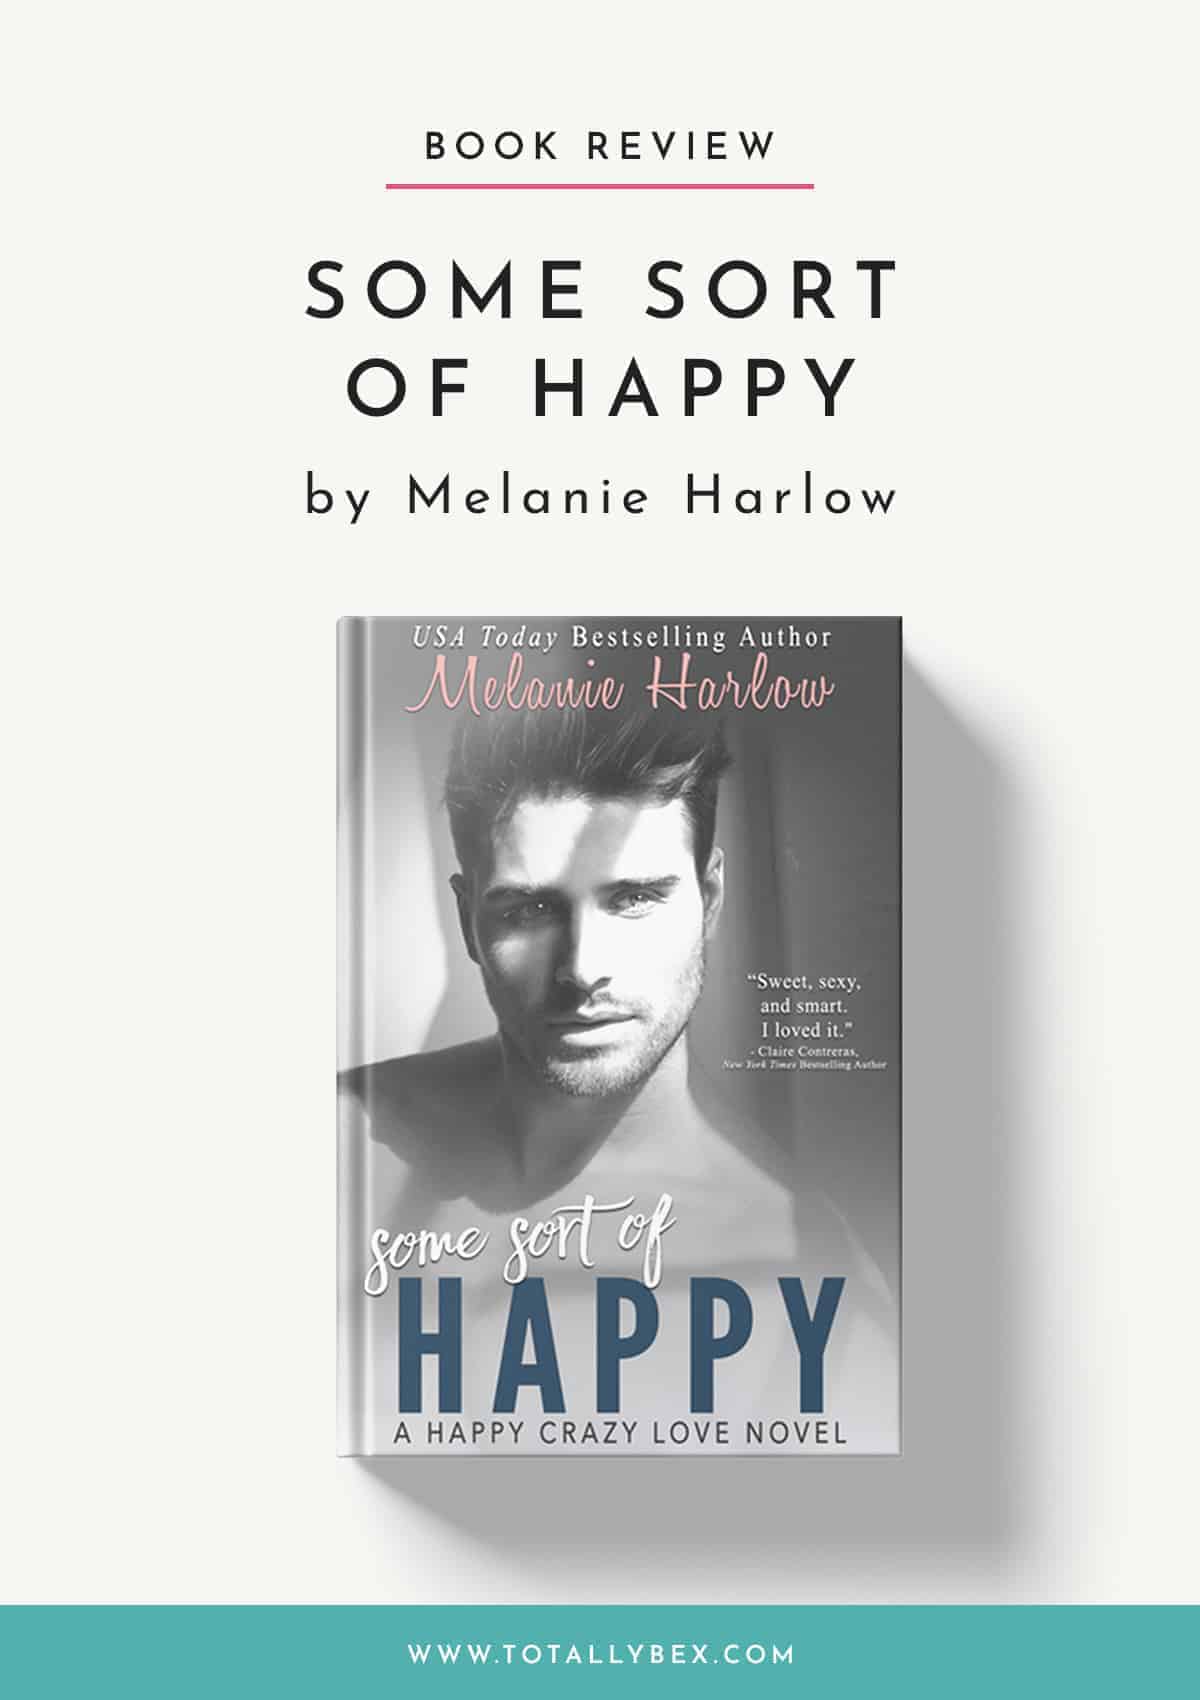 Some Sort of Happy by Melanie Harlow – Irresistibly Charming!